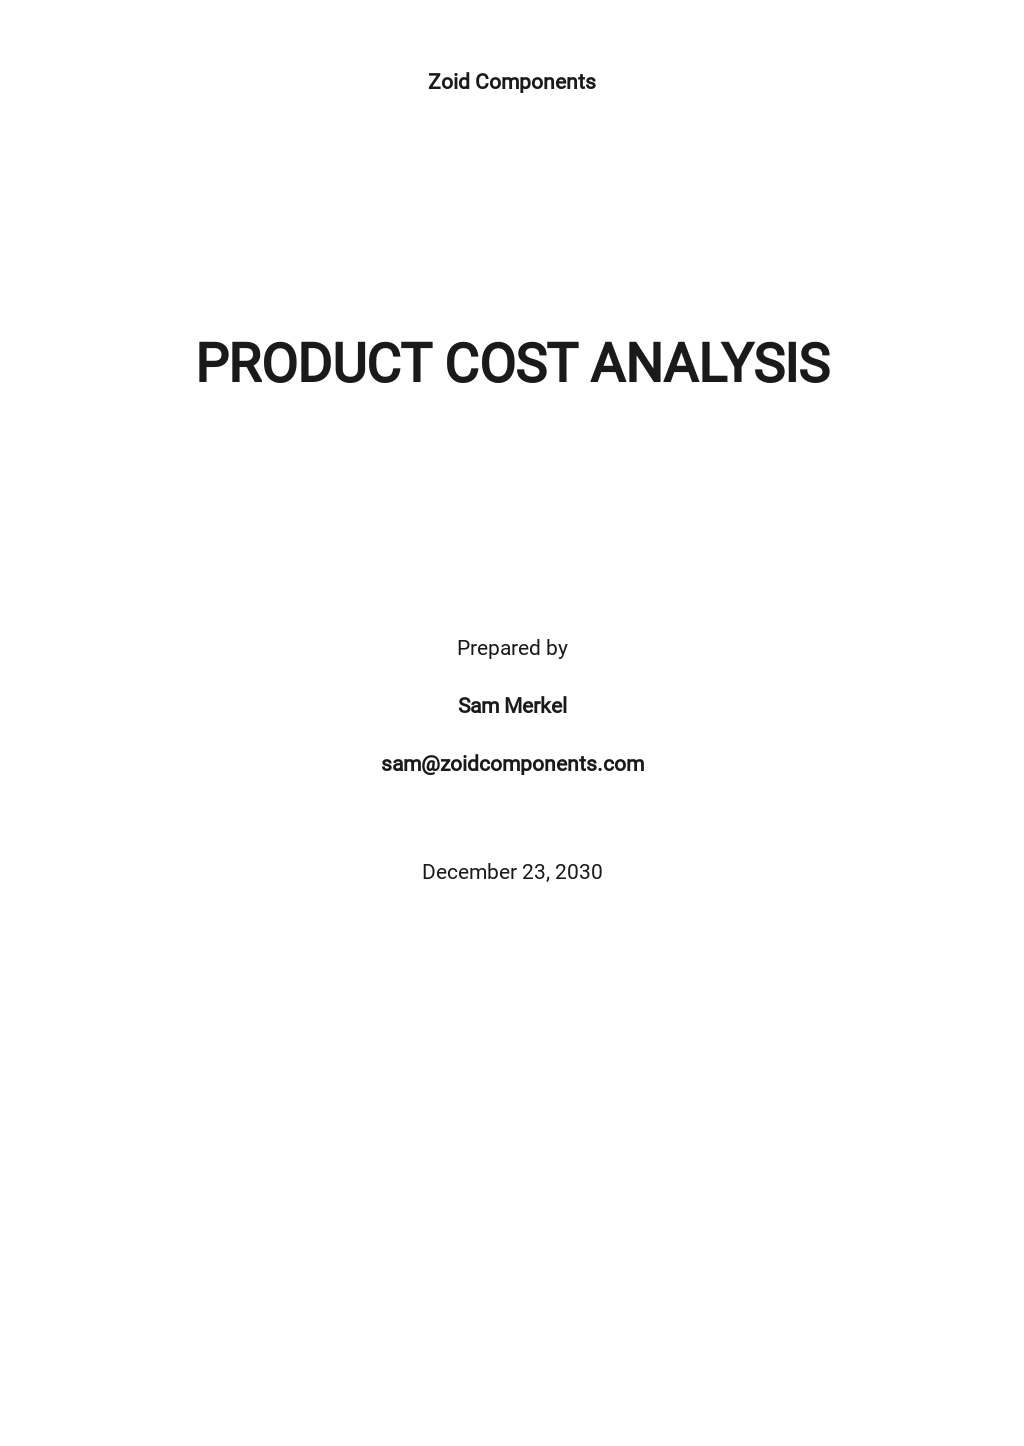 Simple Product Cost Analysis Template.jpe